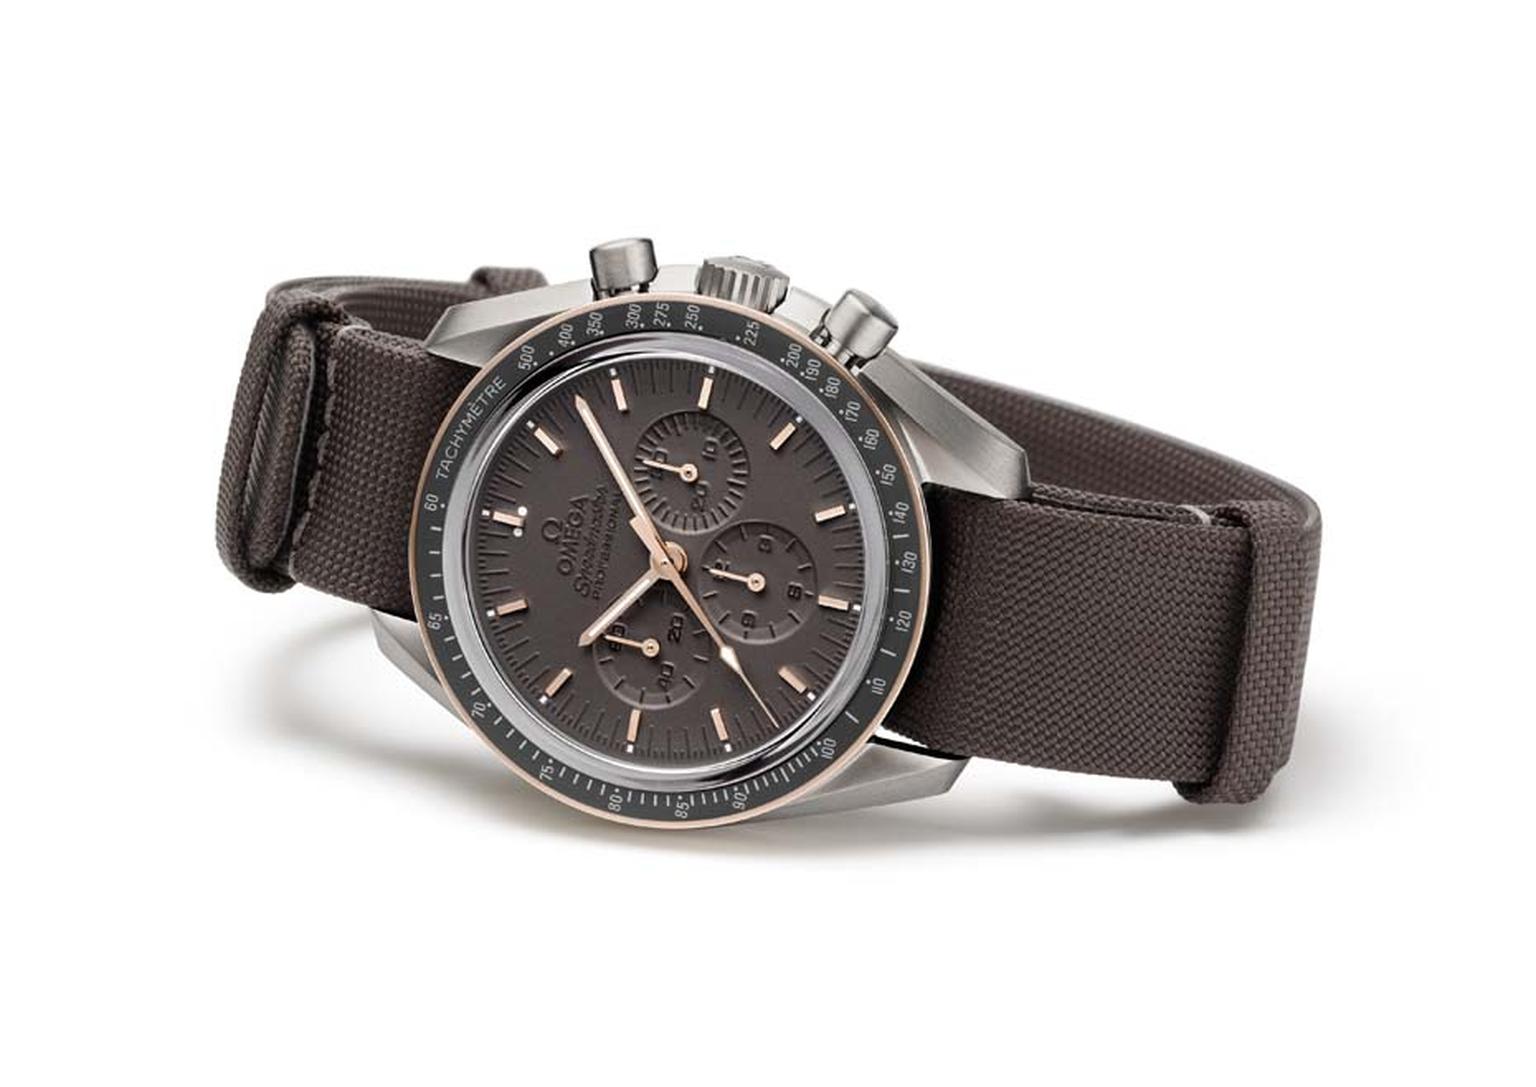 Omega Speedmaster Professional Apollo 11 45th Anniversary, limited to 1,969 pieces, on a hard-wearing NATO strap.